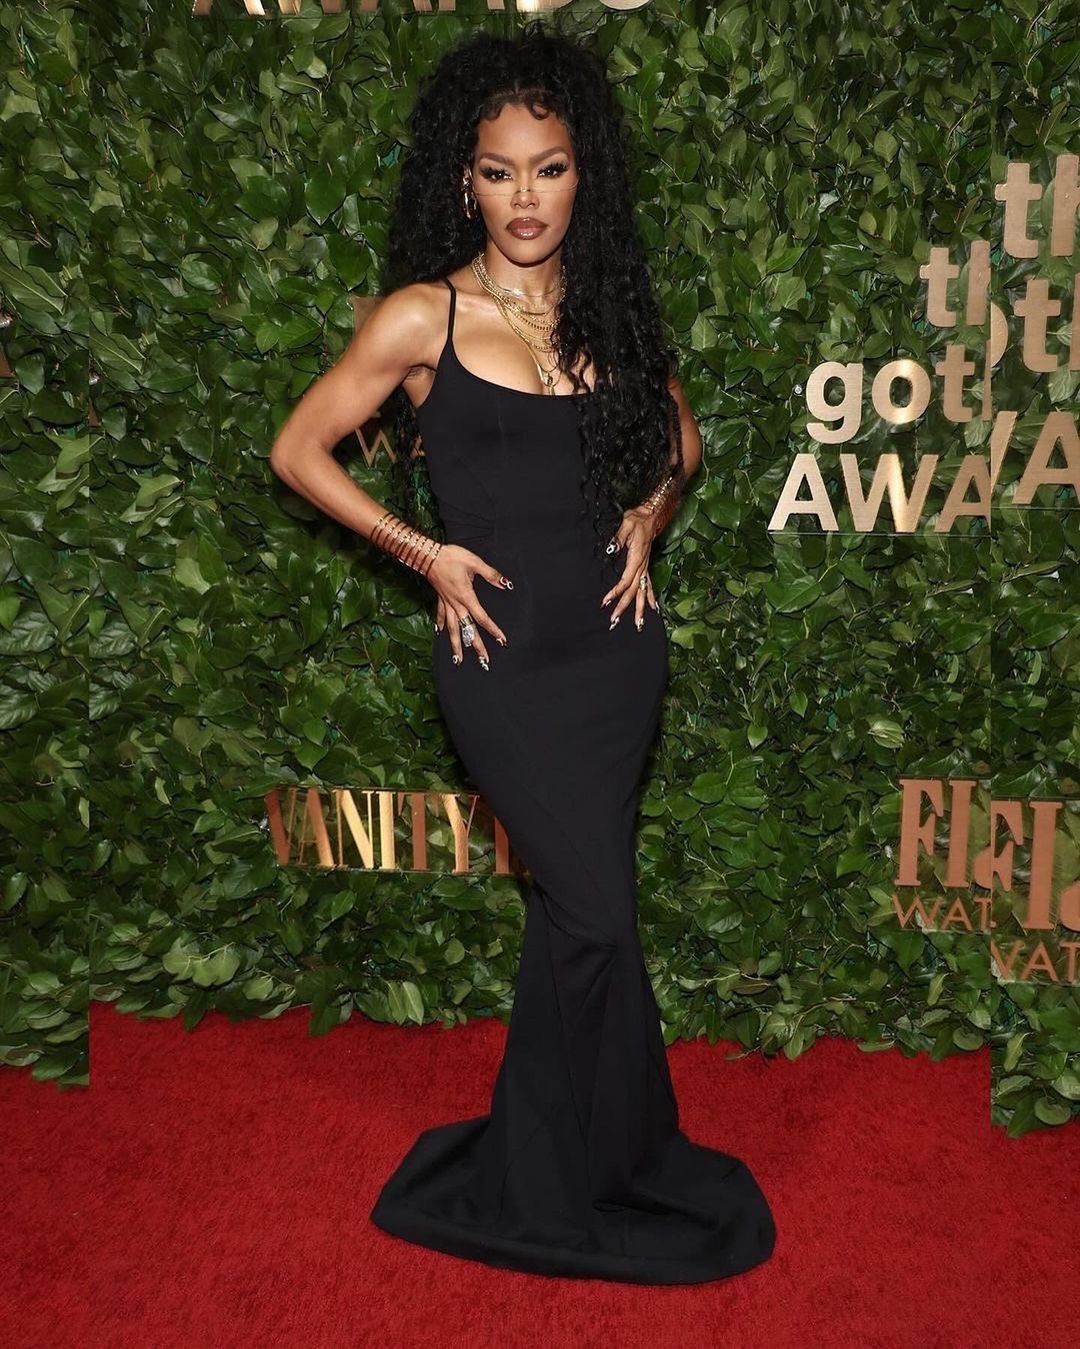 On the Scene on the 2023 Gotham Awards with Teyana Taylor in Rick Owens, Danielle Brooks in Hanifa, Nicole Beharie in Dolce & Gabbana and Extra